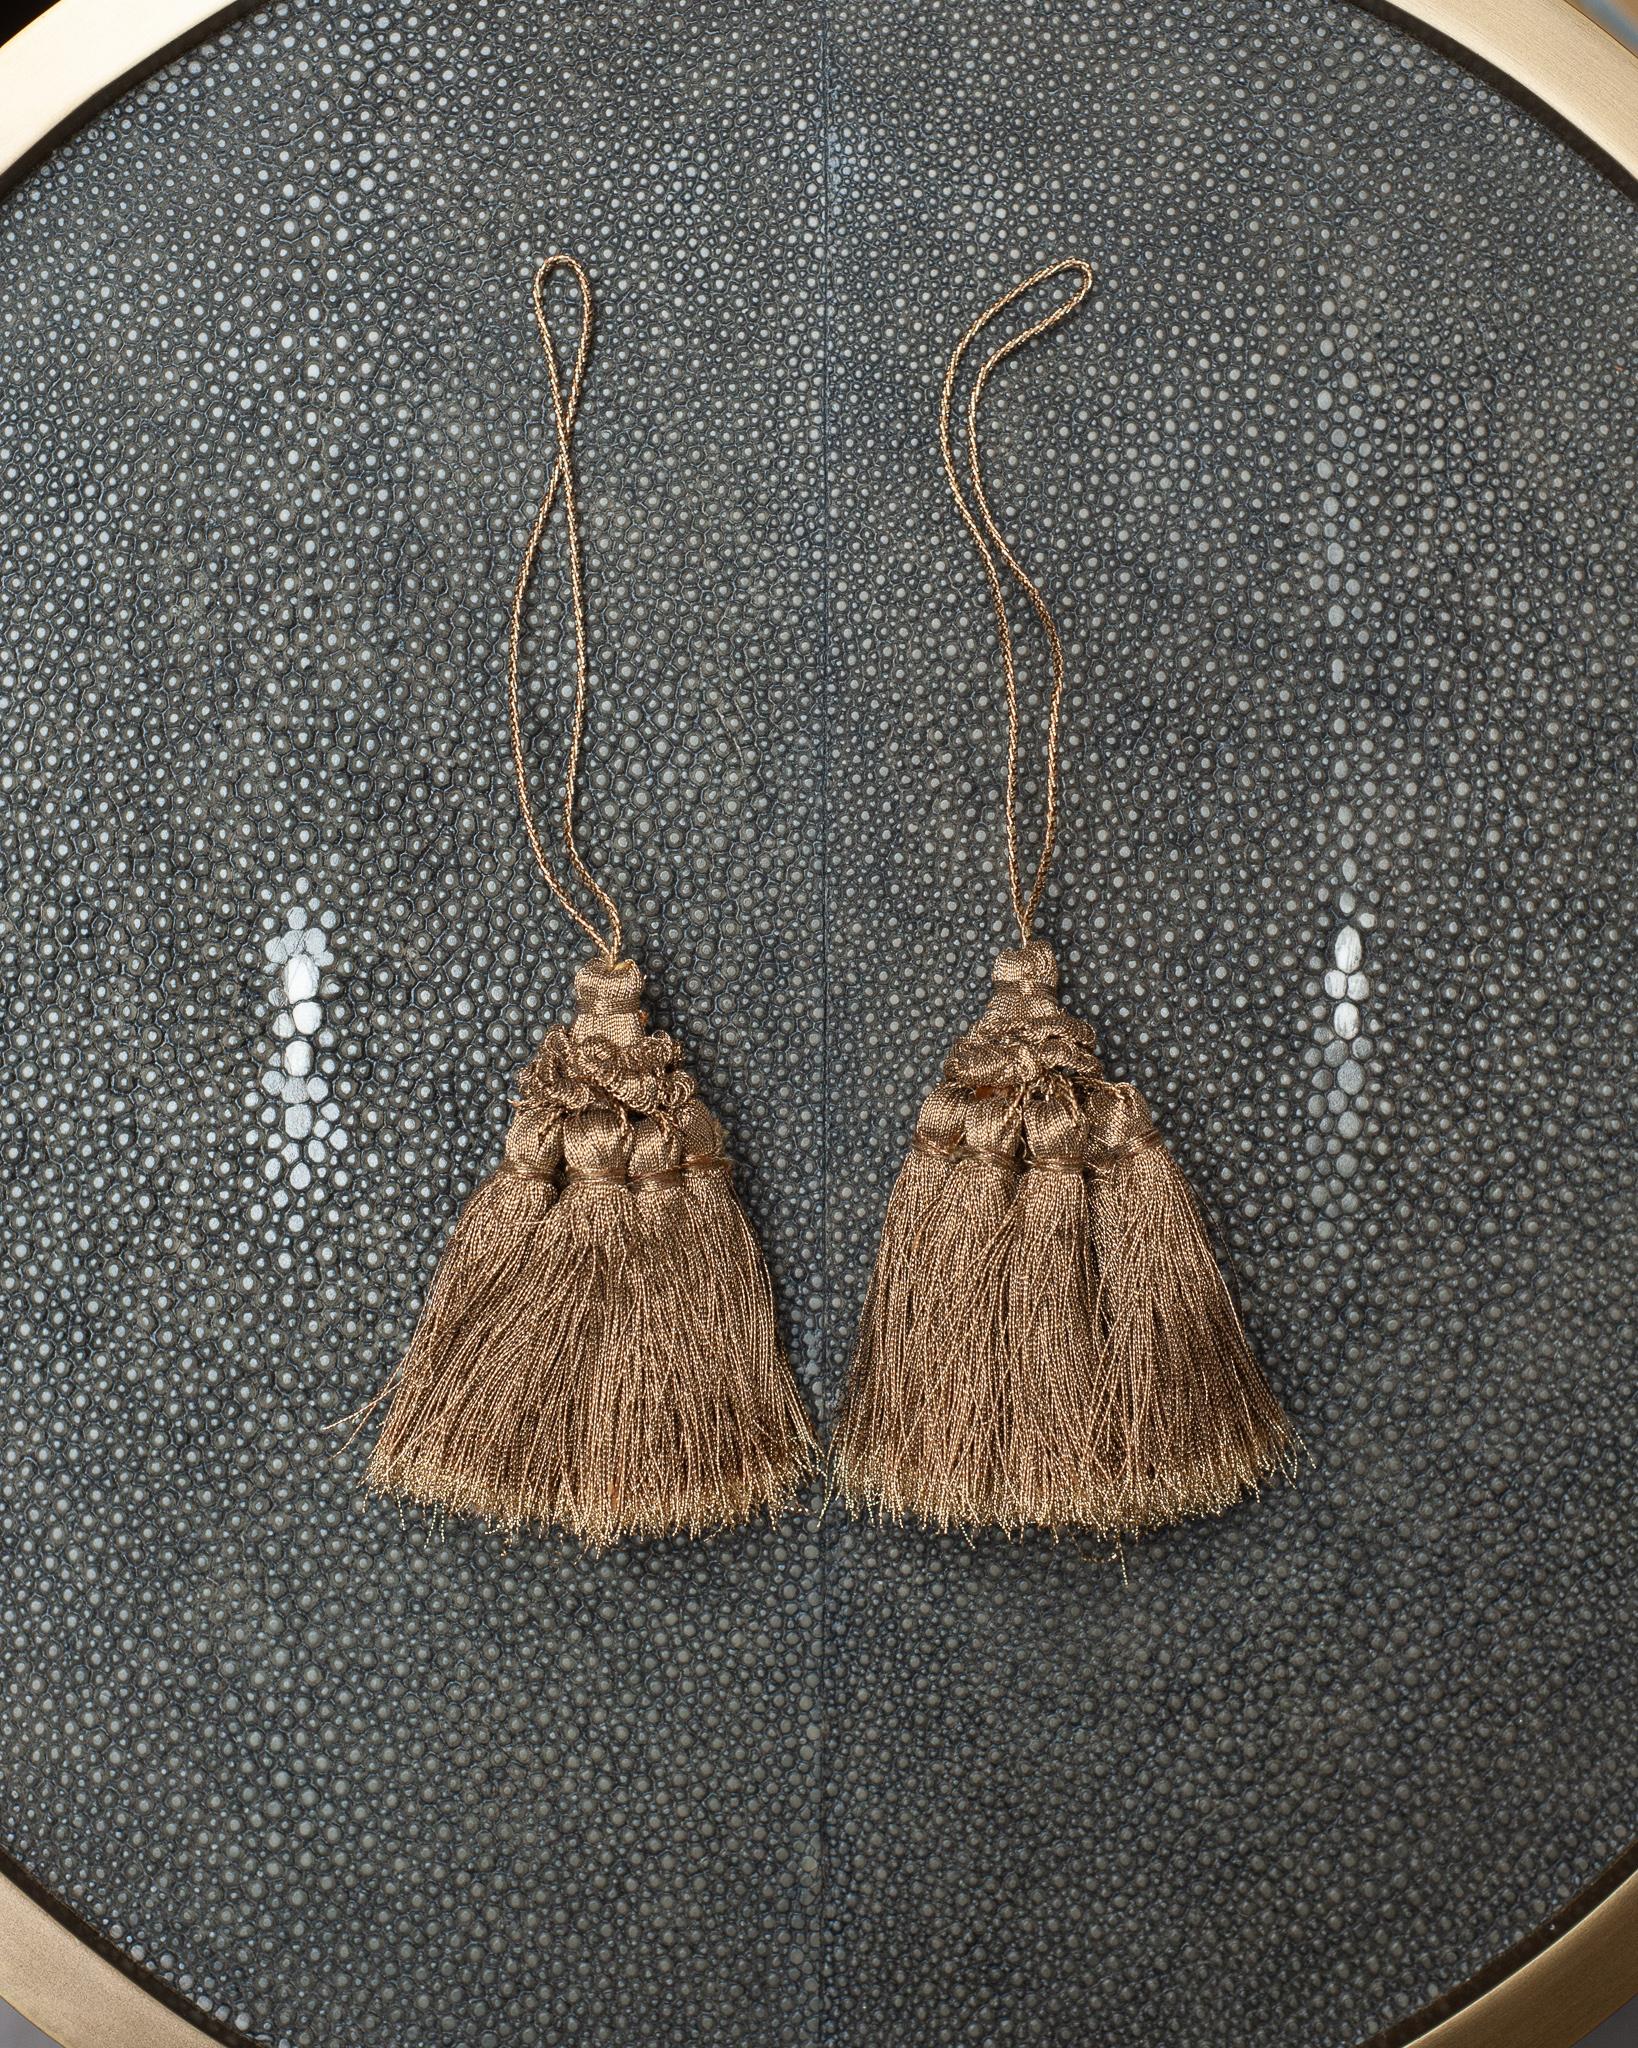 A beautiful pair of metallic silk tassels, from Bevilacqua Italy. Established by Luigi Bevilacqua, and operating out of Venice since 1875, Bevilacqua Tessuti produces the most exquisite handwoven fabrics available out of Europe following ancient